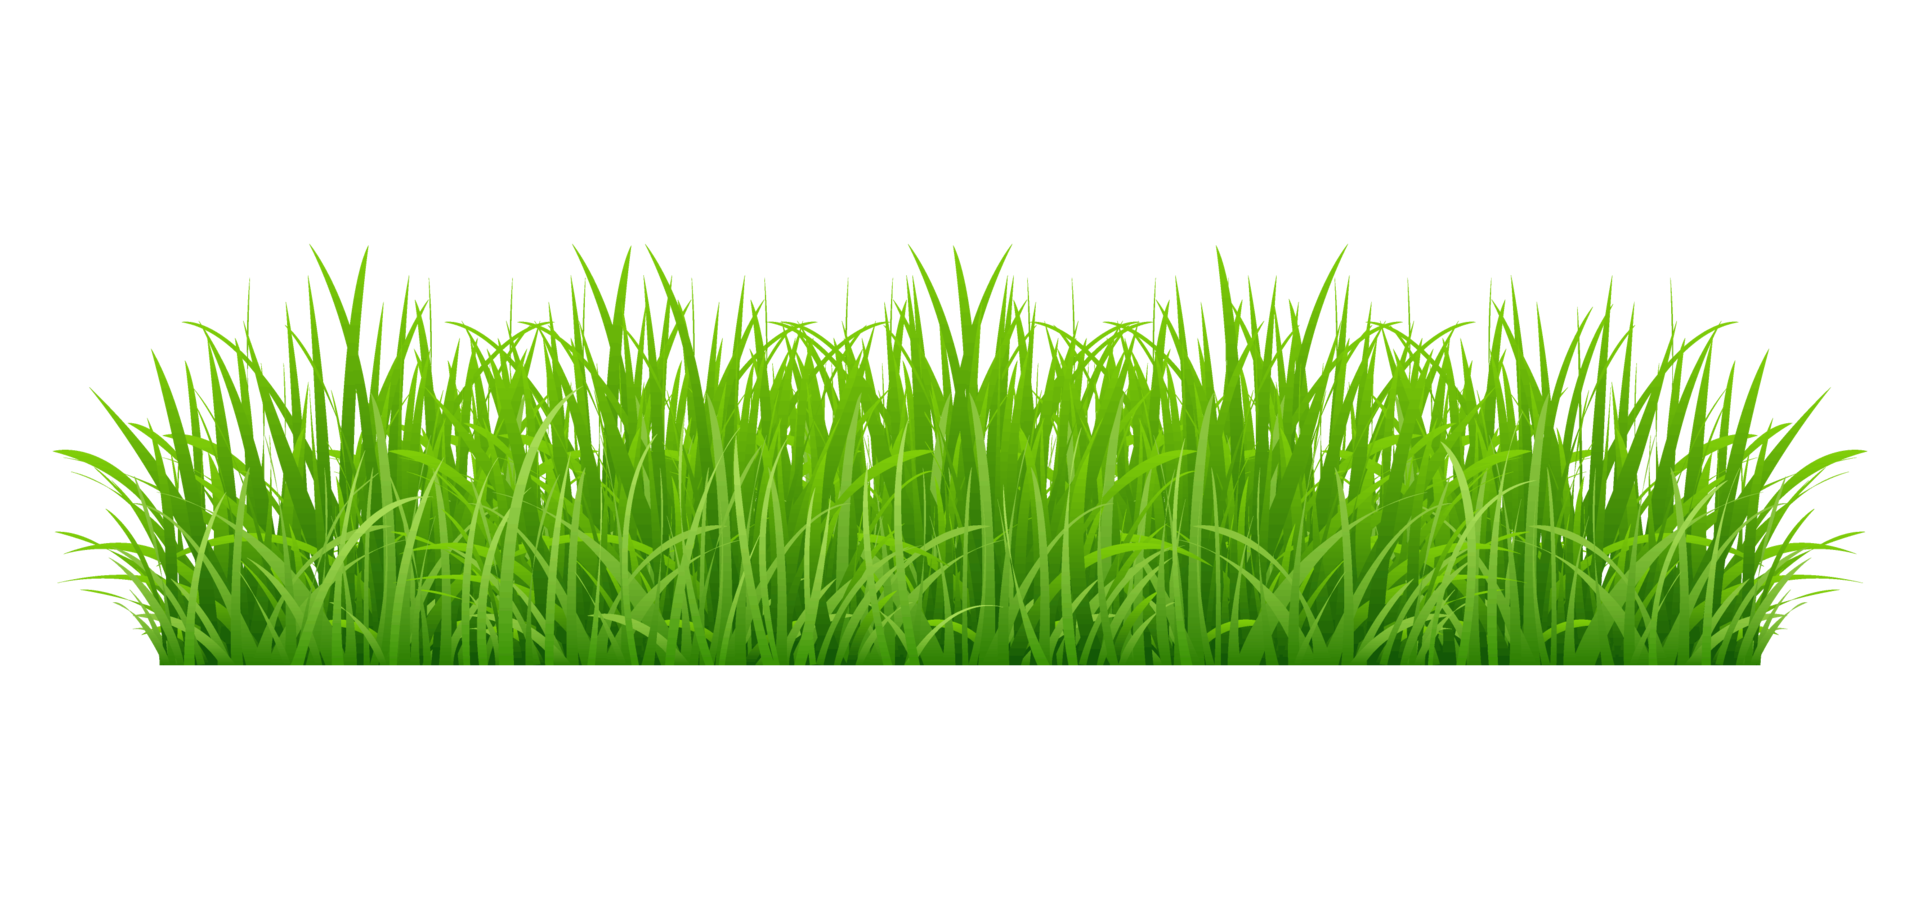 Realistic Grass PNG Free Images with Transparent Background - (7,341 Free  Downloads)